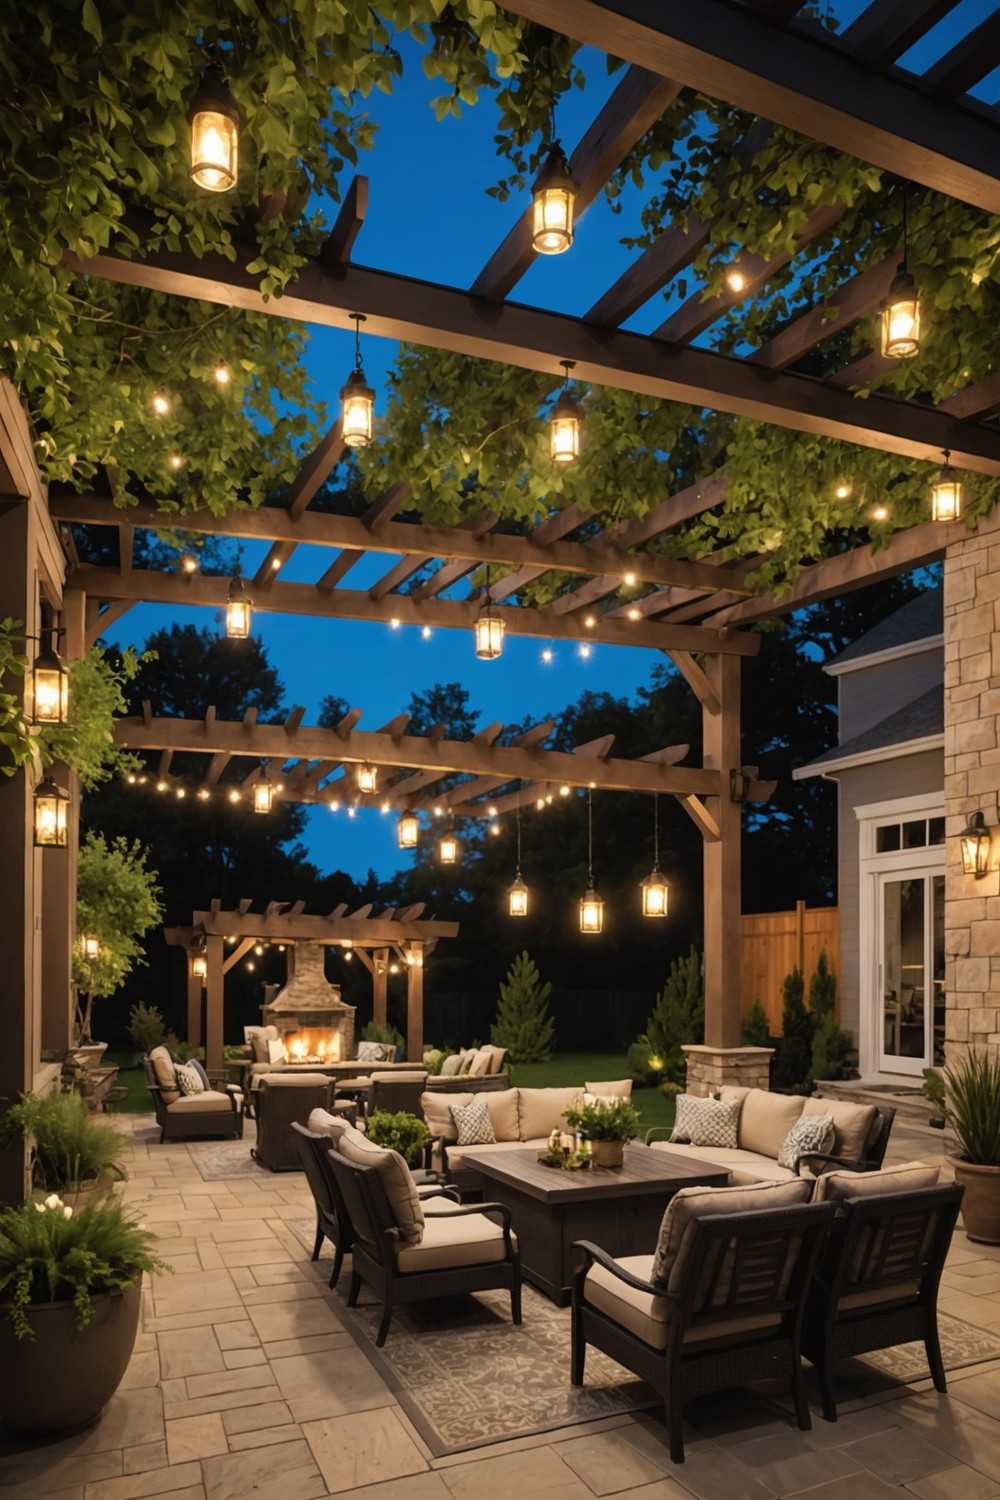 Spacious Pergola with Extended Roof and Lighting